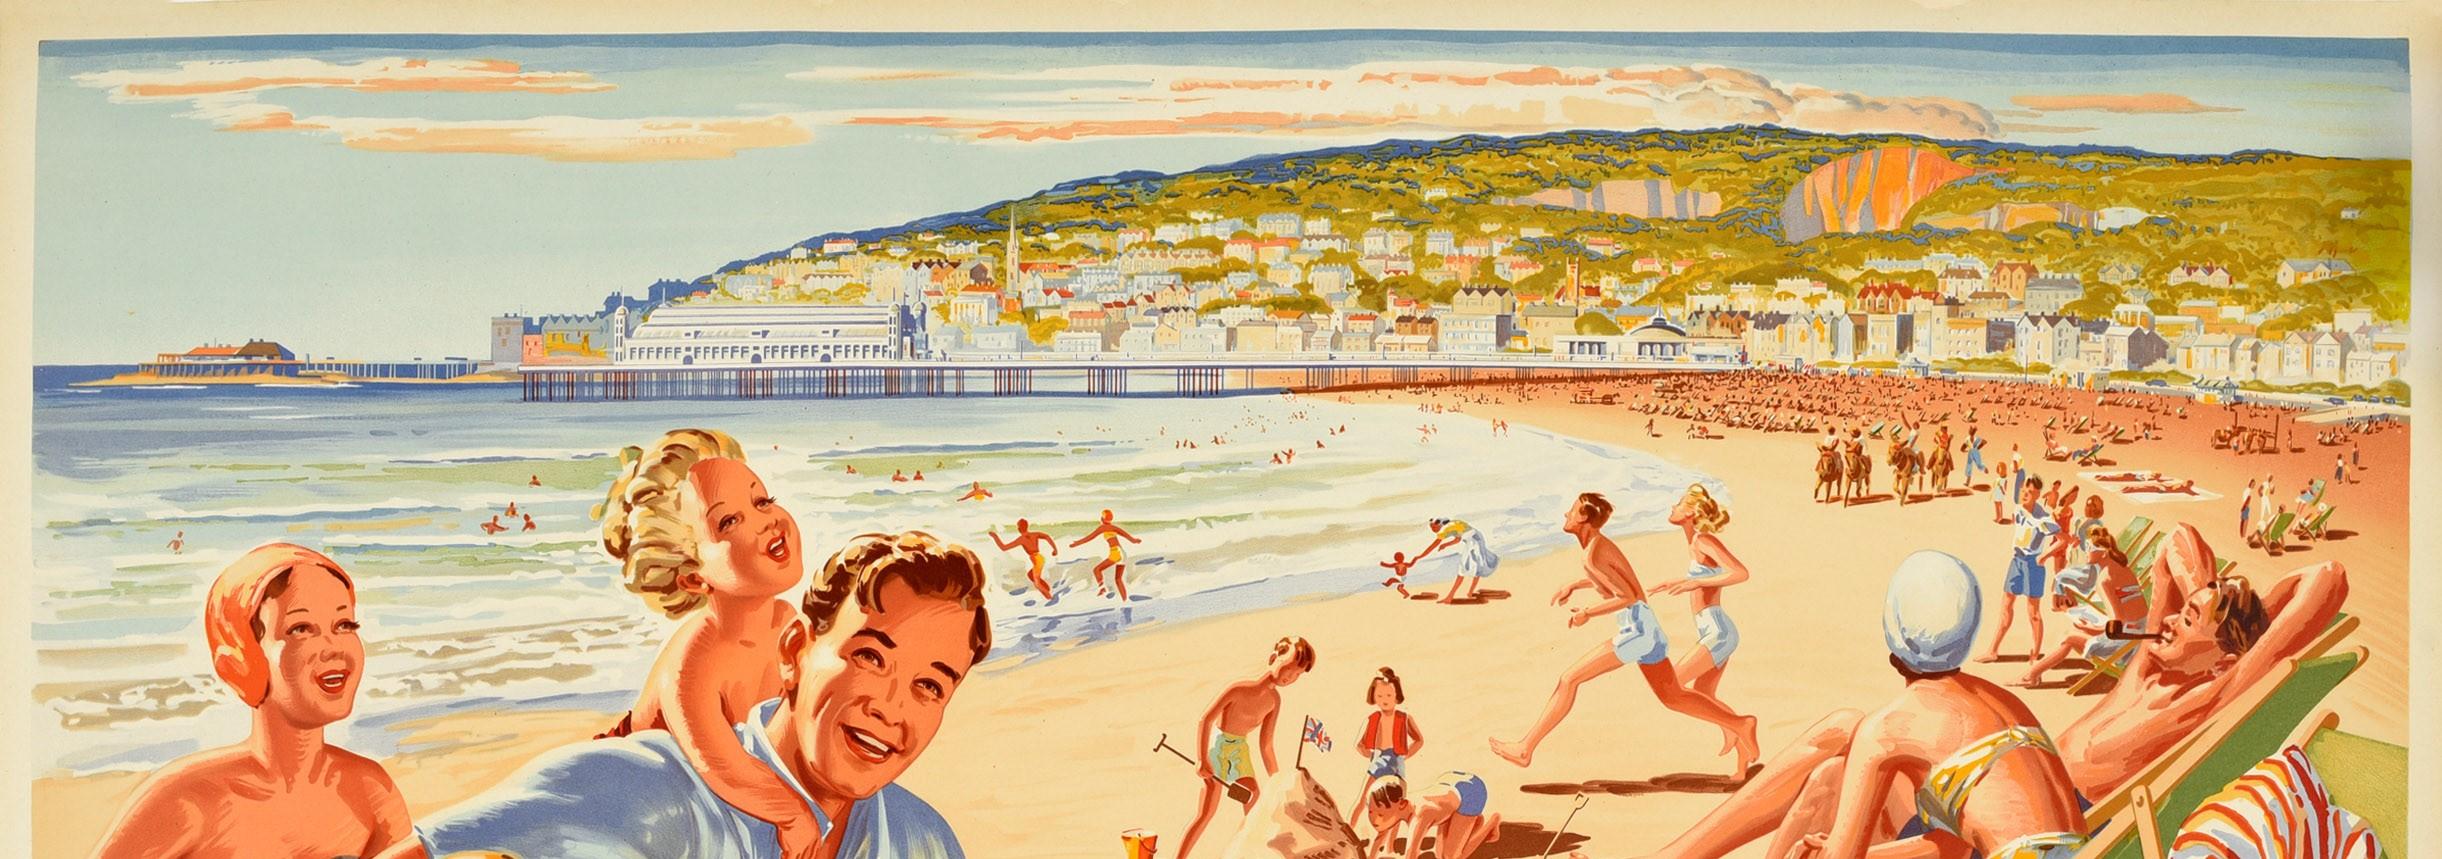 Original vintage travel poster advertising Weston-Super-Mare The Smile in Smiling Somerset published by British Railways. Fantastic summer illustration of people enjoying their beach holiday with a happy family in the foreground - the father giving